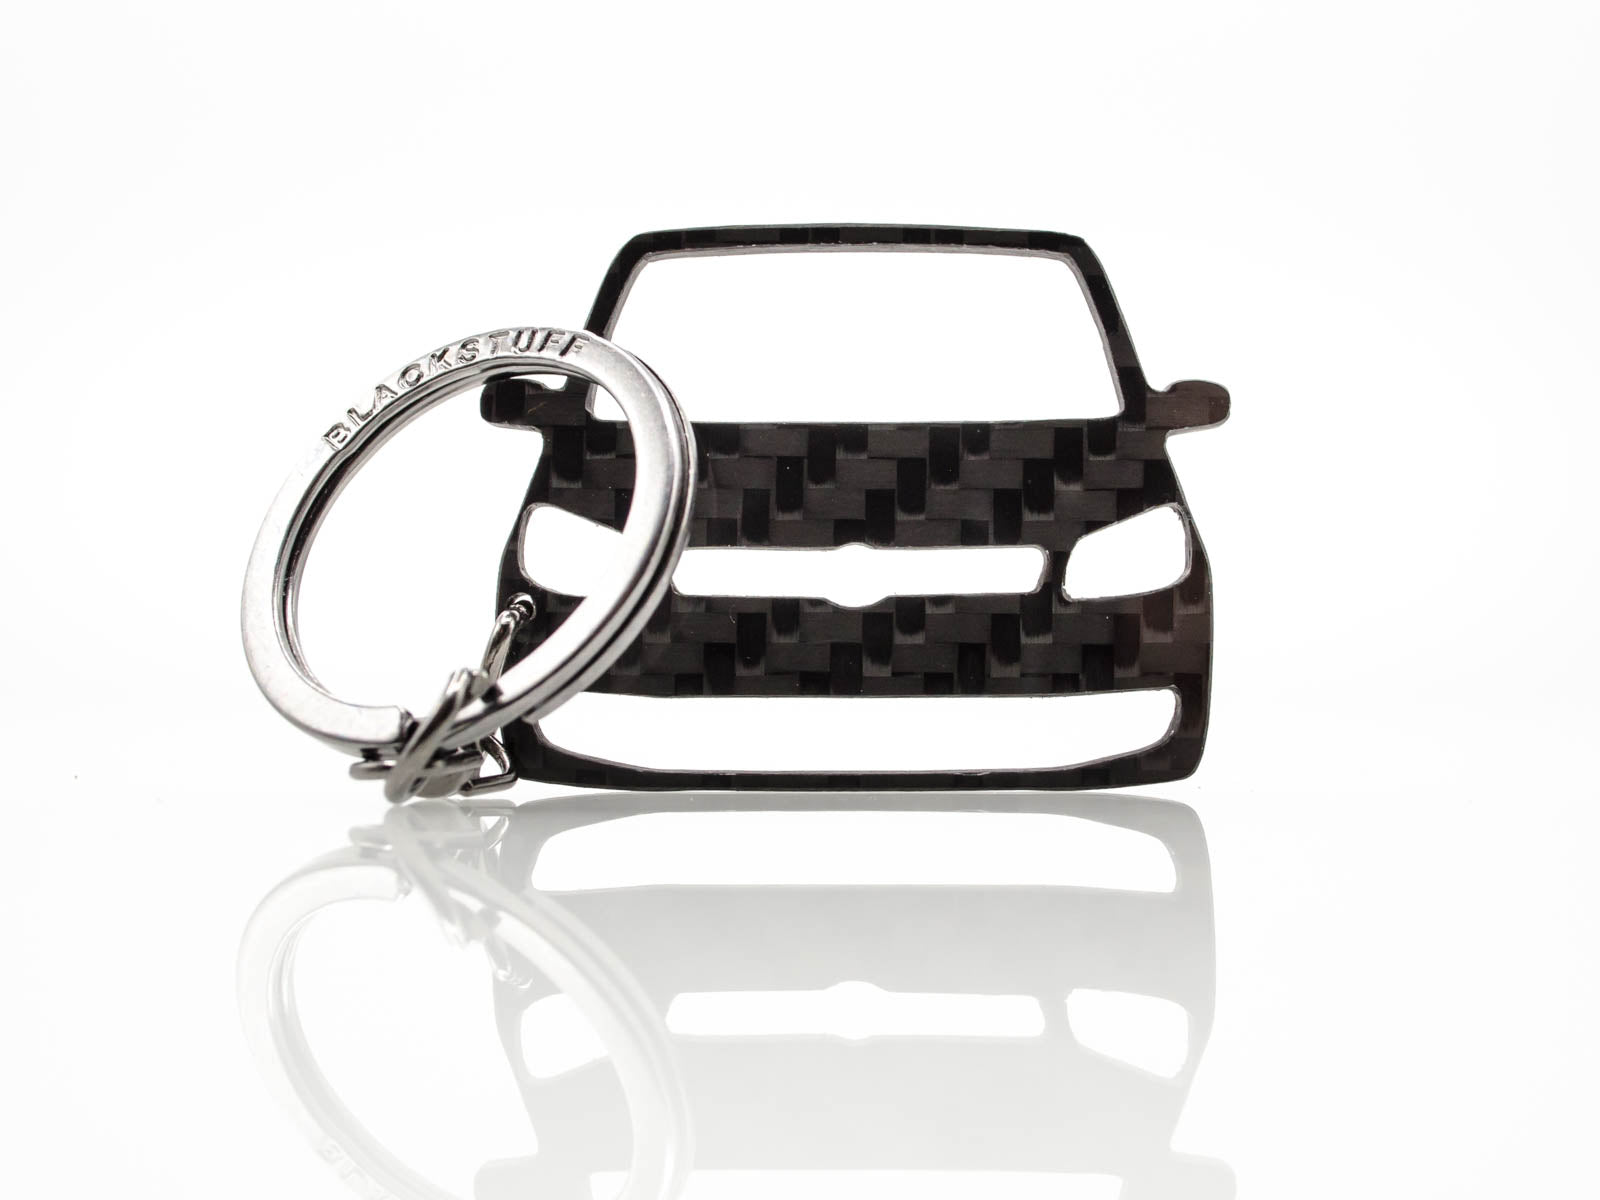 BlackStuff Carbon Fiber Keychain Keyring Ring Holder Compatible with Touran Caddy 2010-2015 BS-857